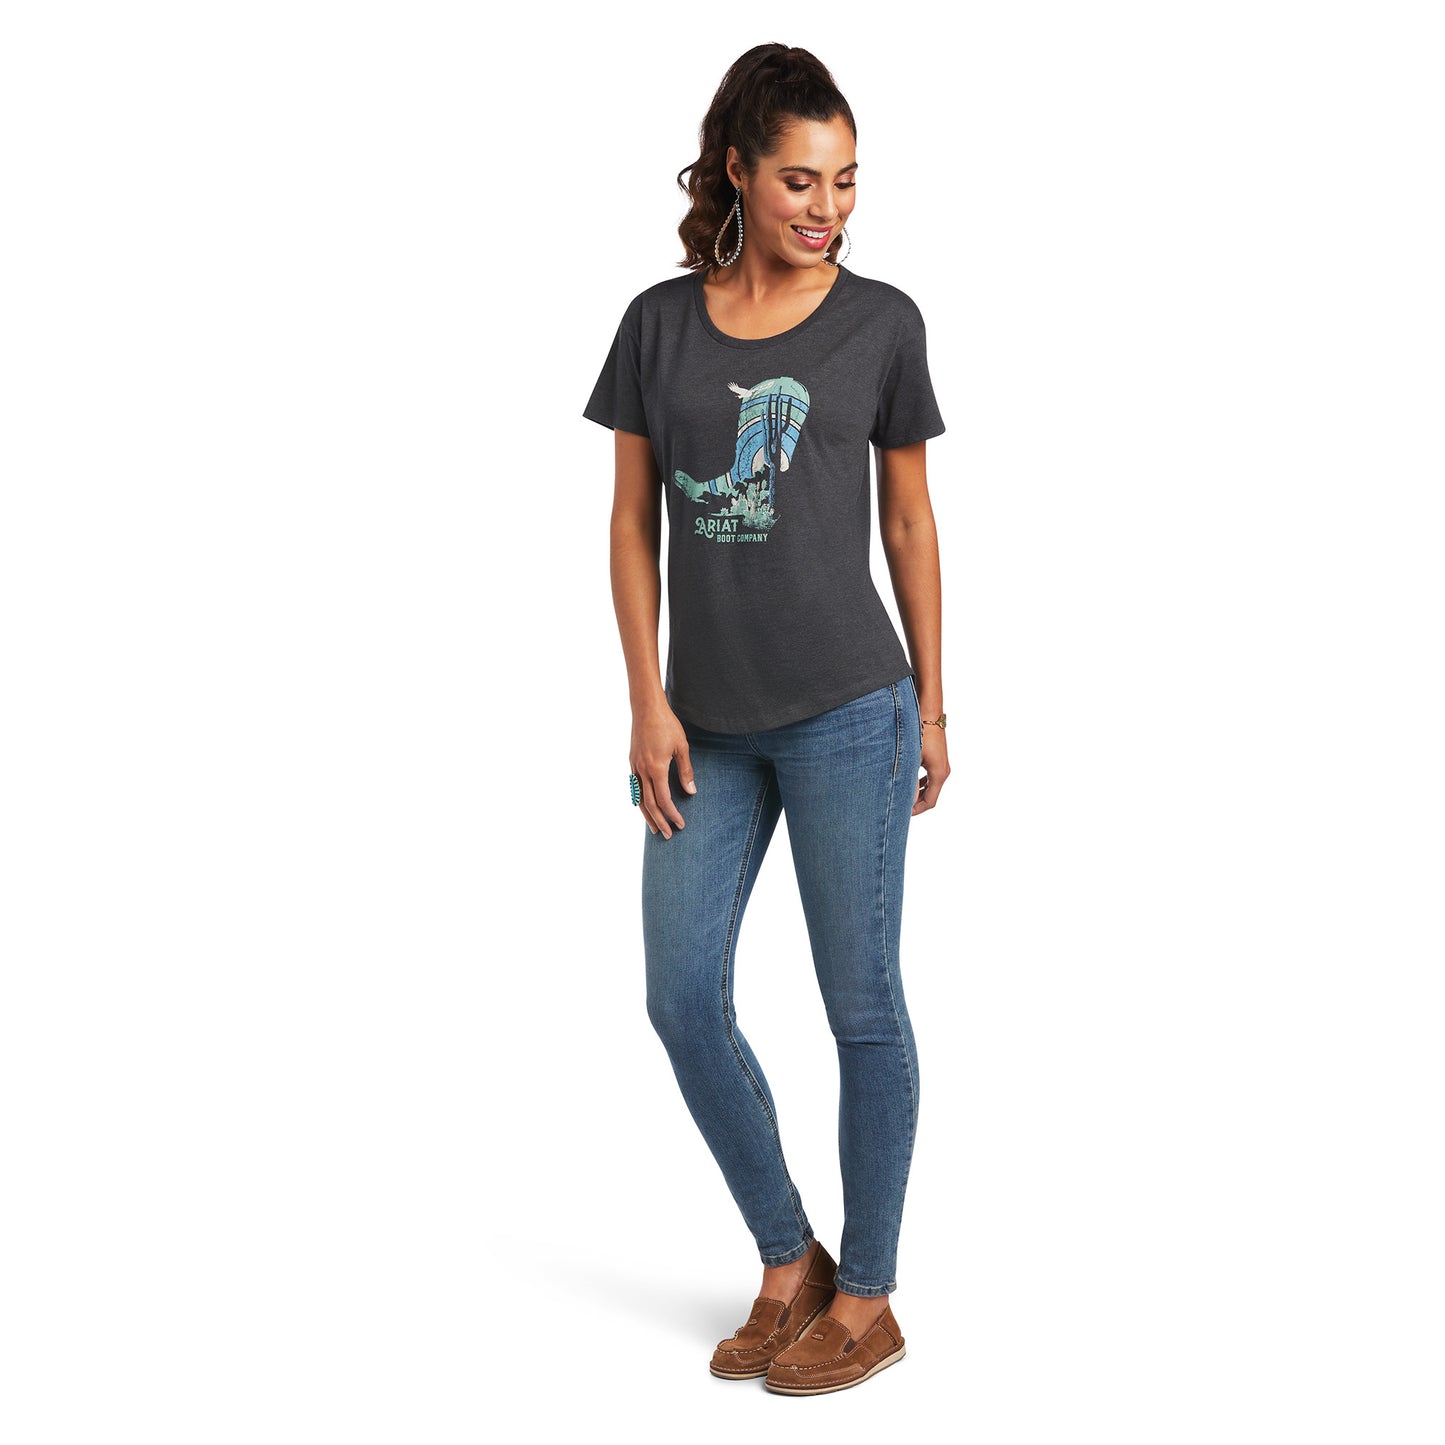 Ariat® Ladies Soaring Boot Charcoal Heather Graphic T-shirt 10040963